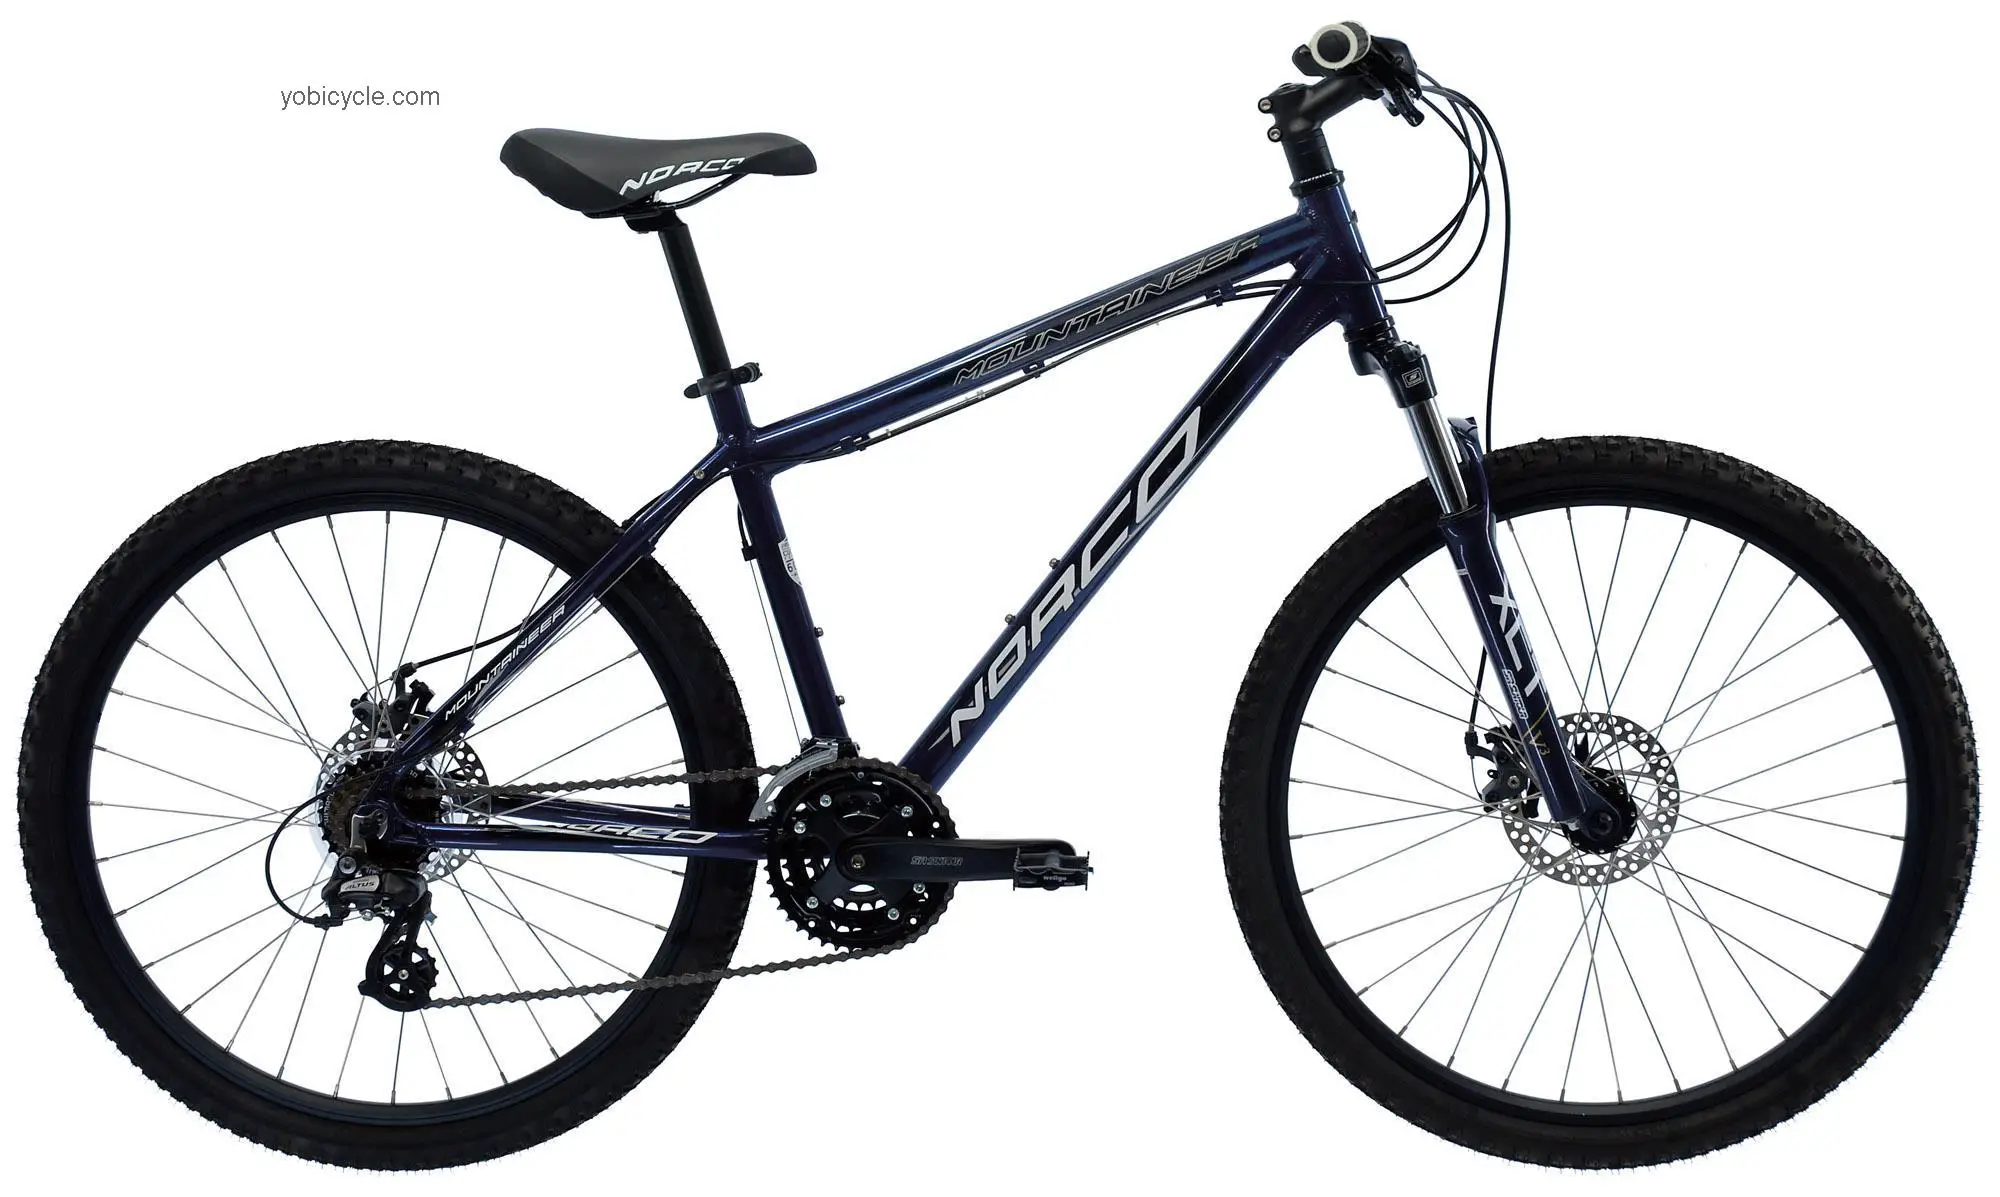 Norco Mountaineer 2011 comparison online with competitors